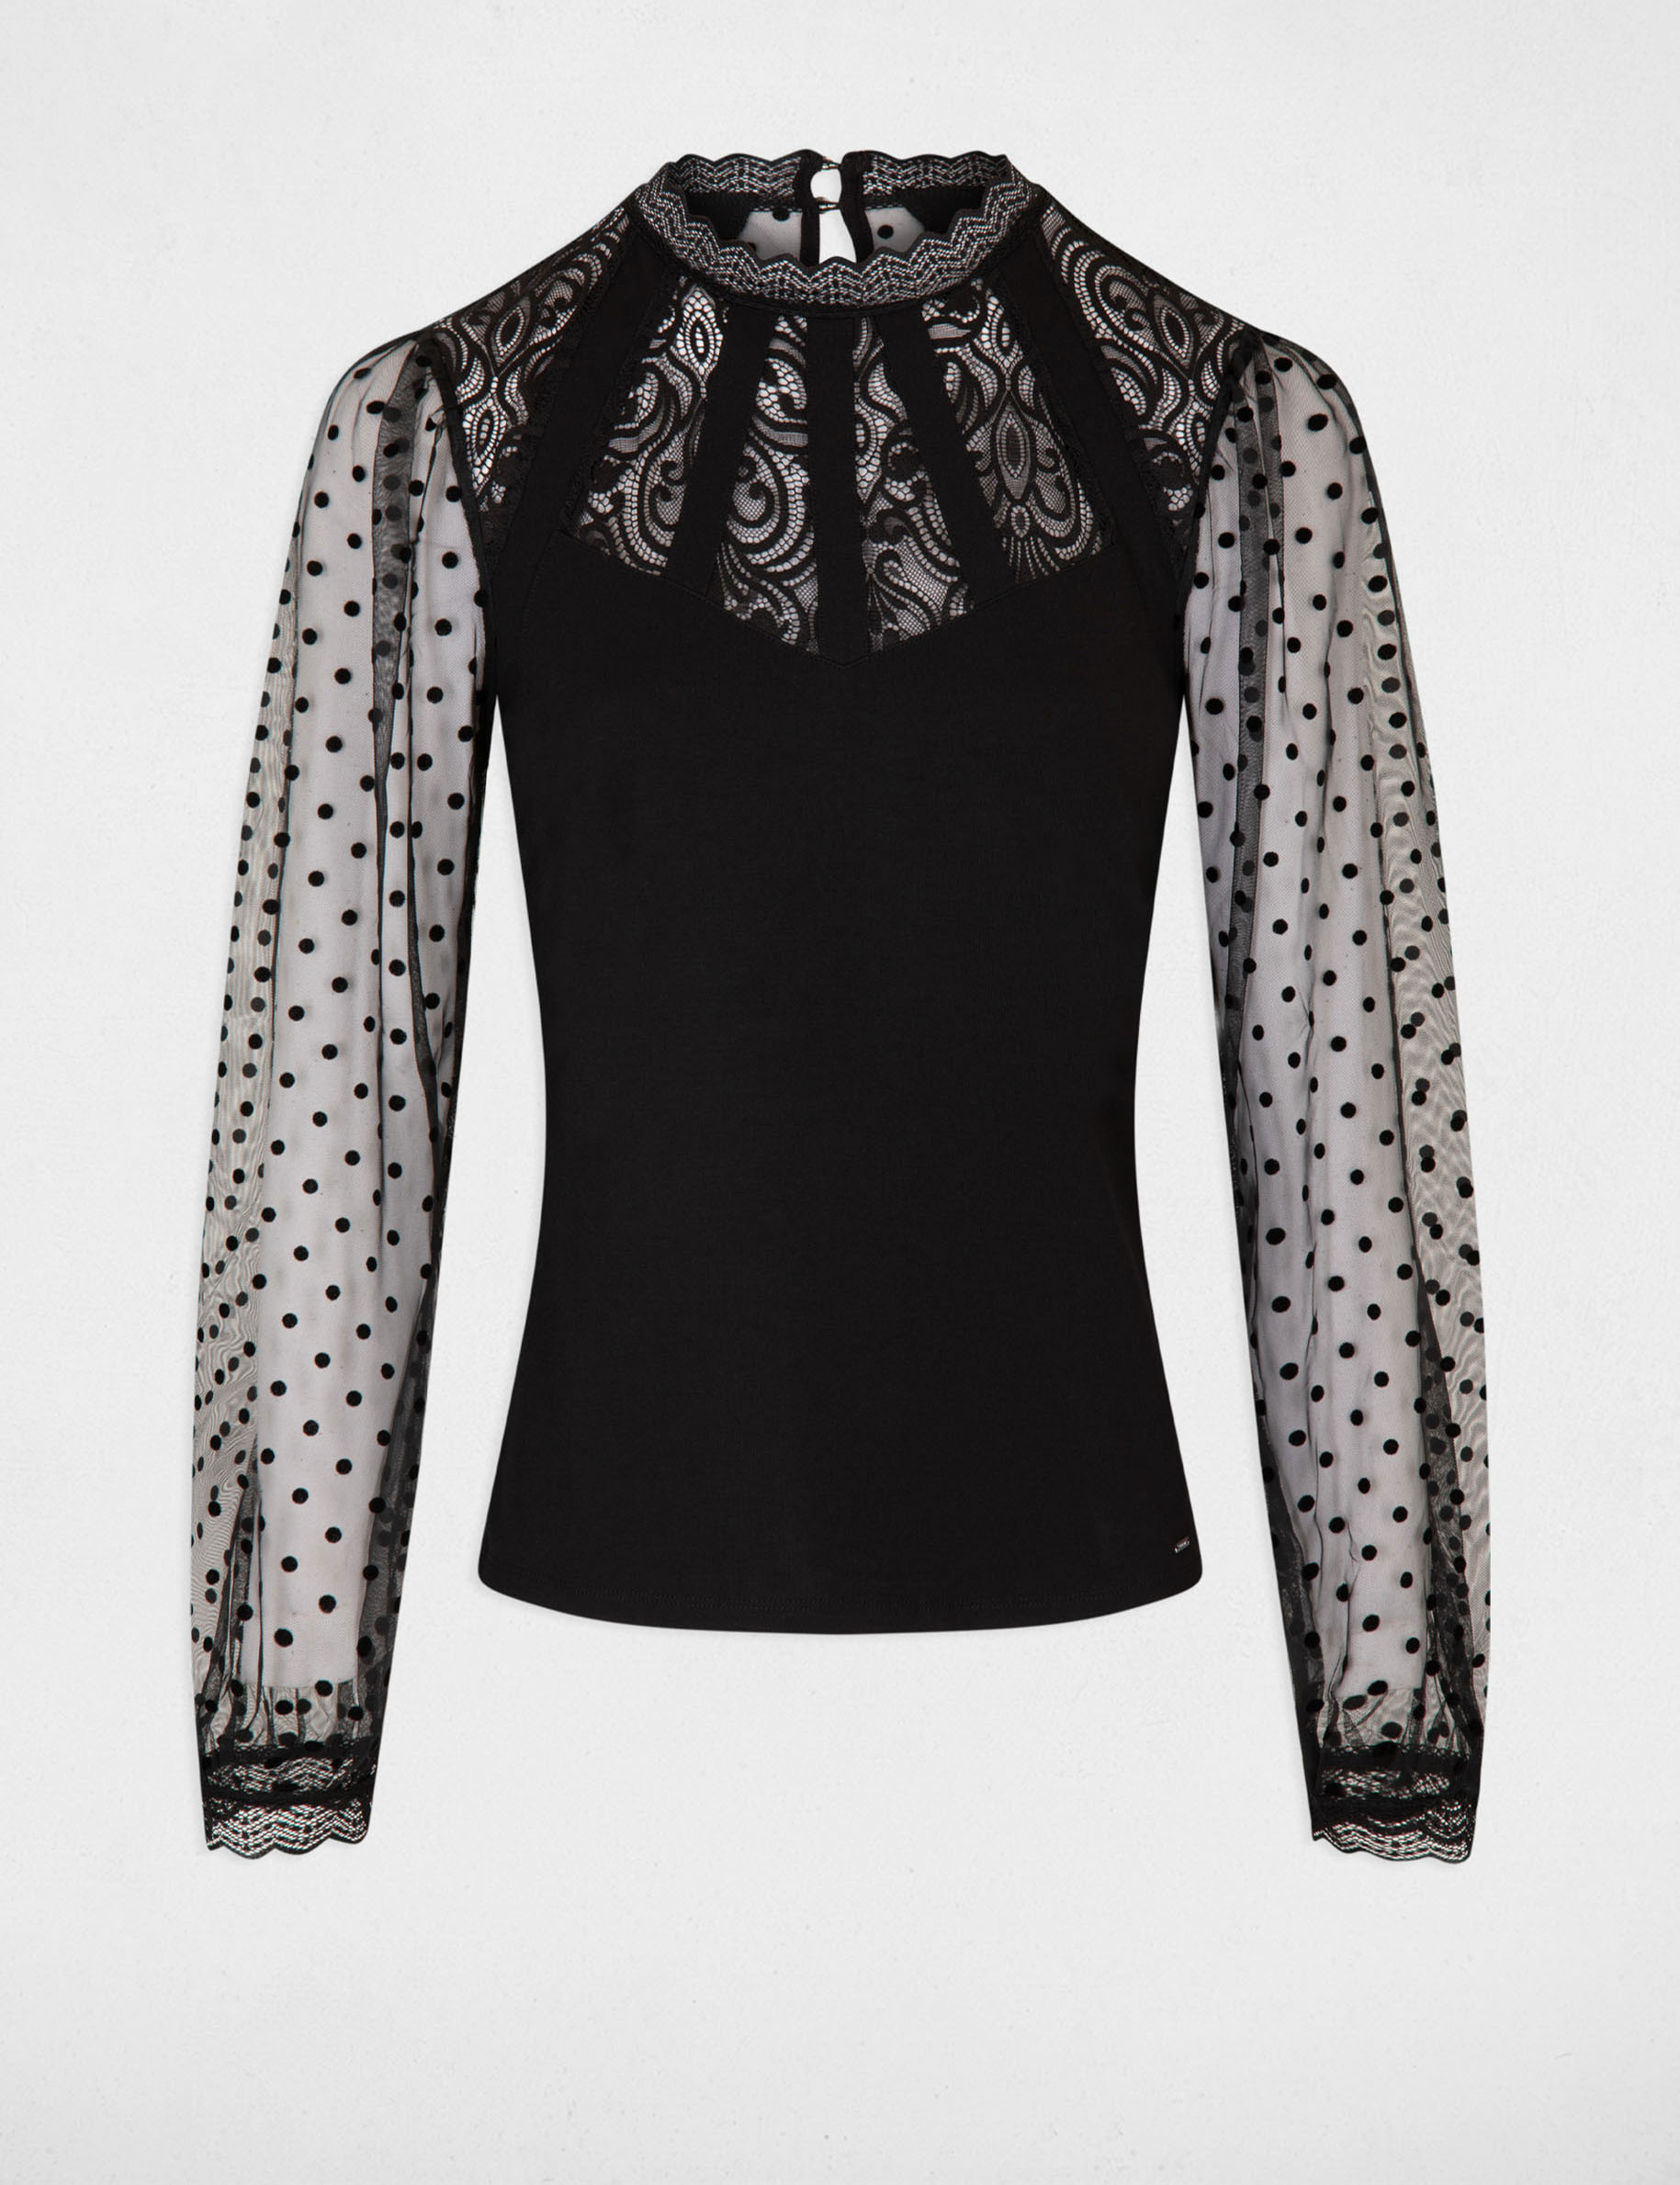 Long-sleeved t-shirt with lace black ladies'